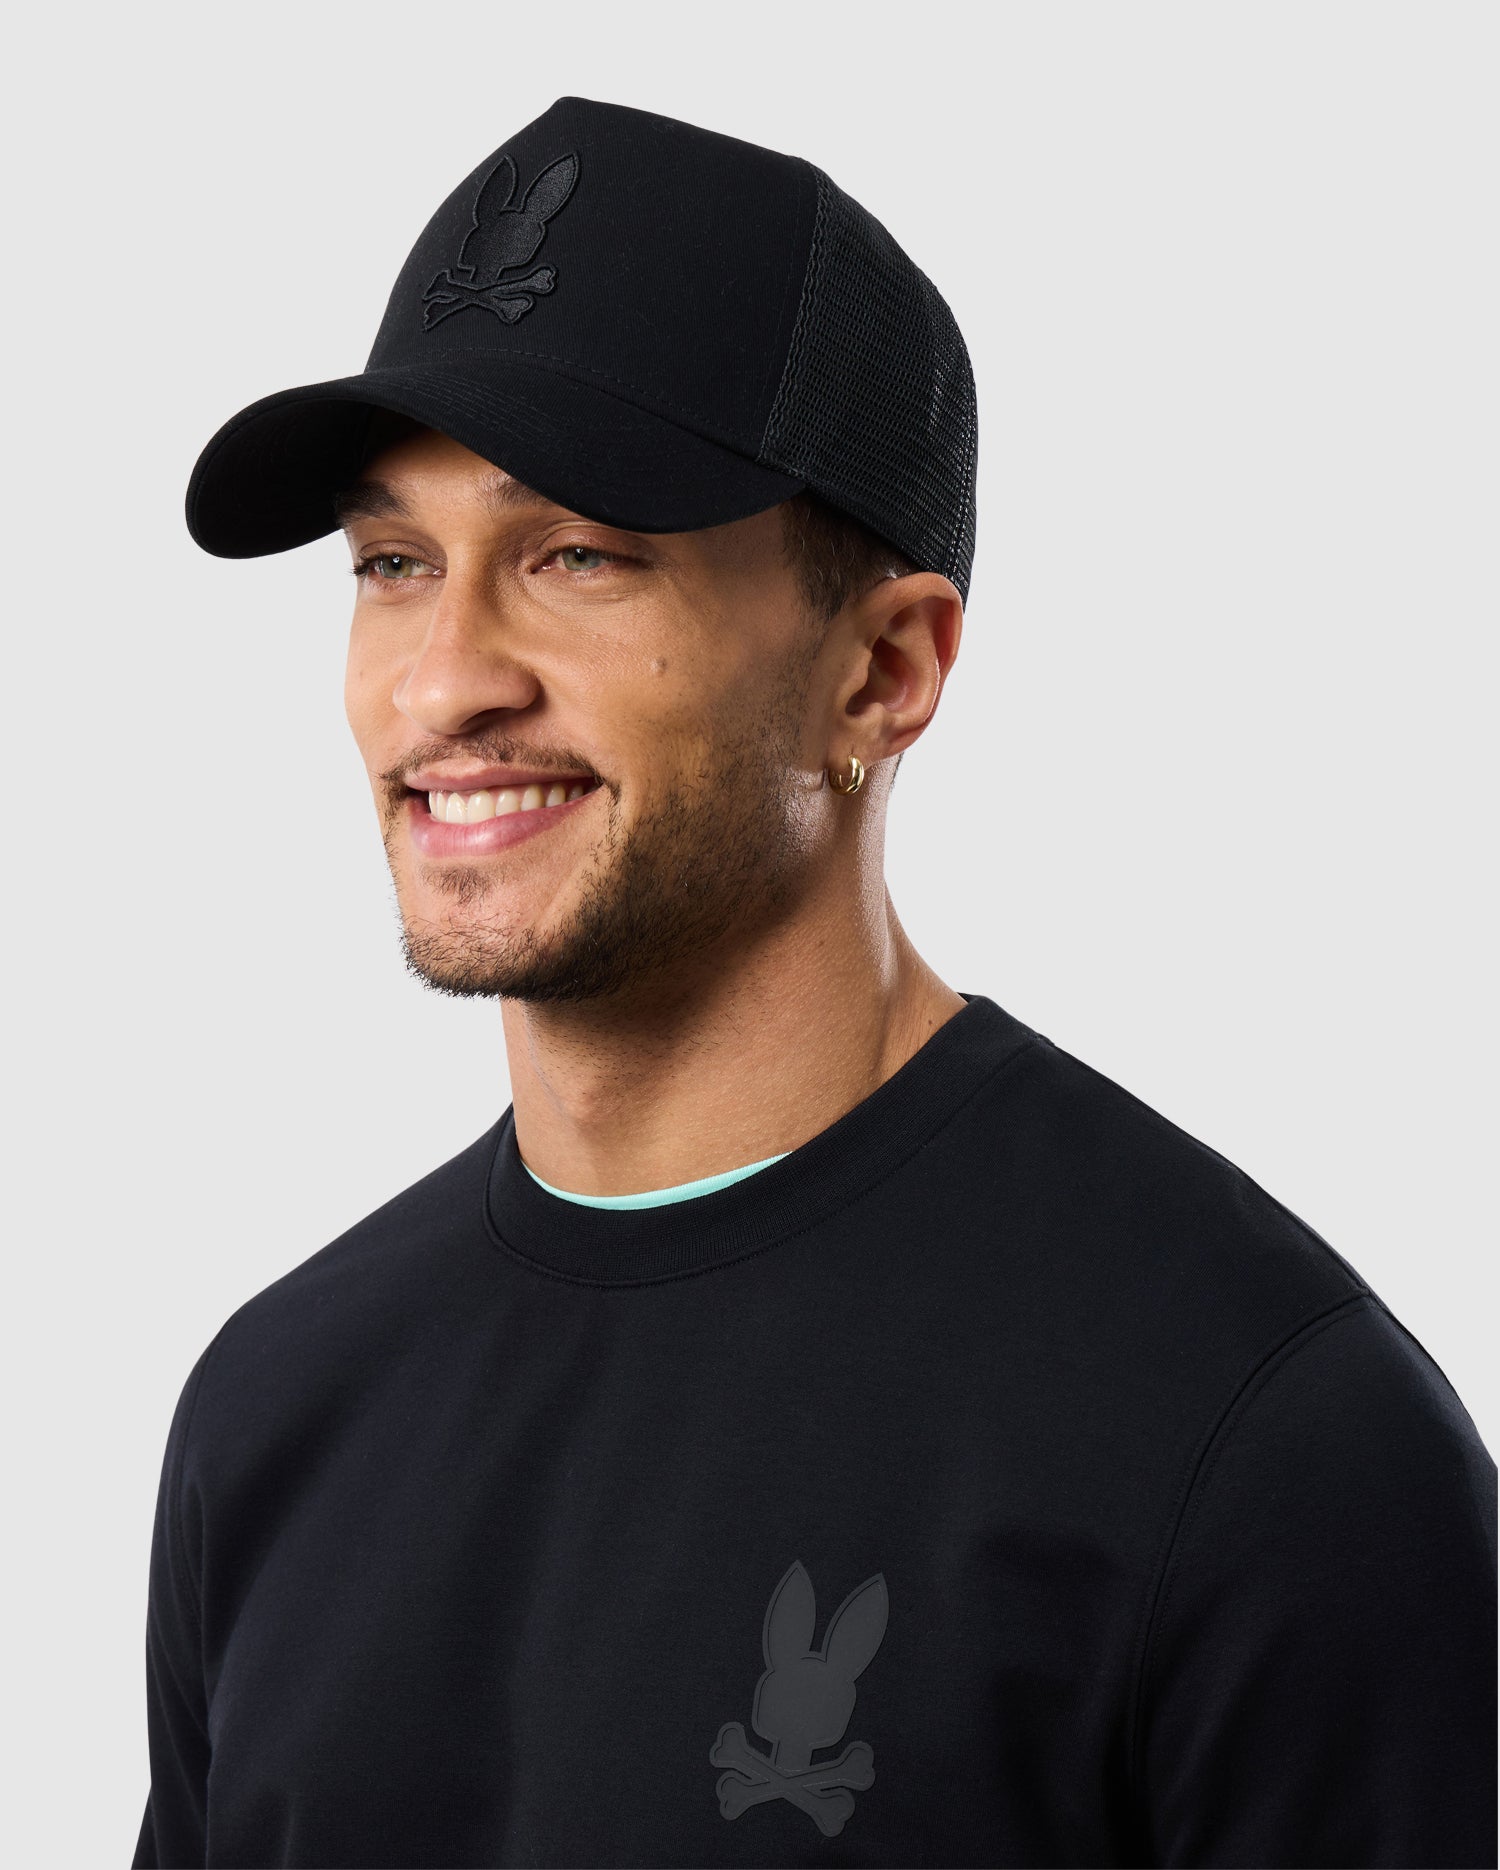 A young man wearing a Psycho Bunny HOUSTON TRUCKER HAT and t-shirt with a small rabbit logo, smiling slightly, against a light grey background.